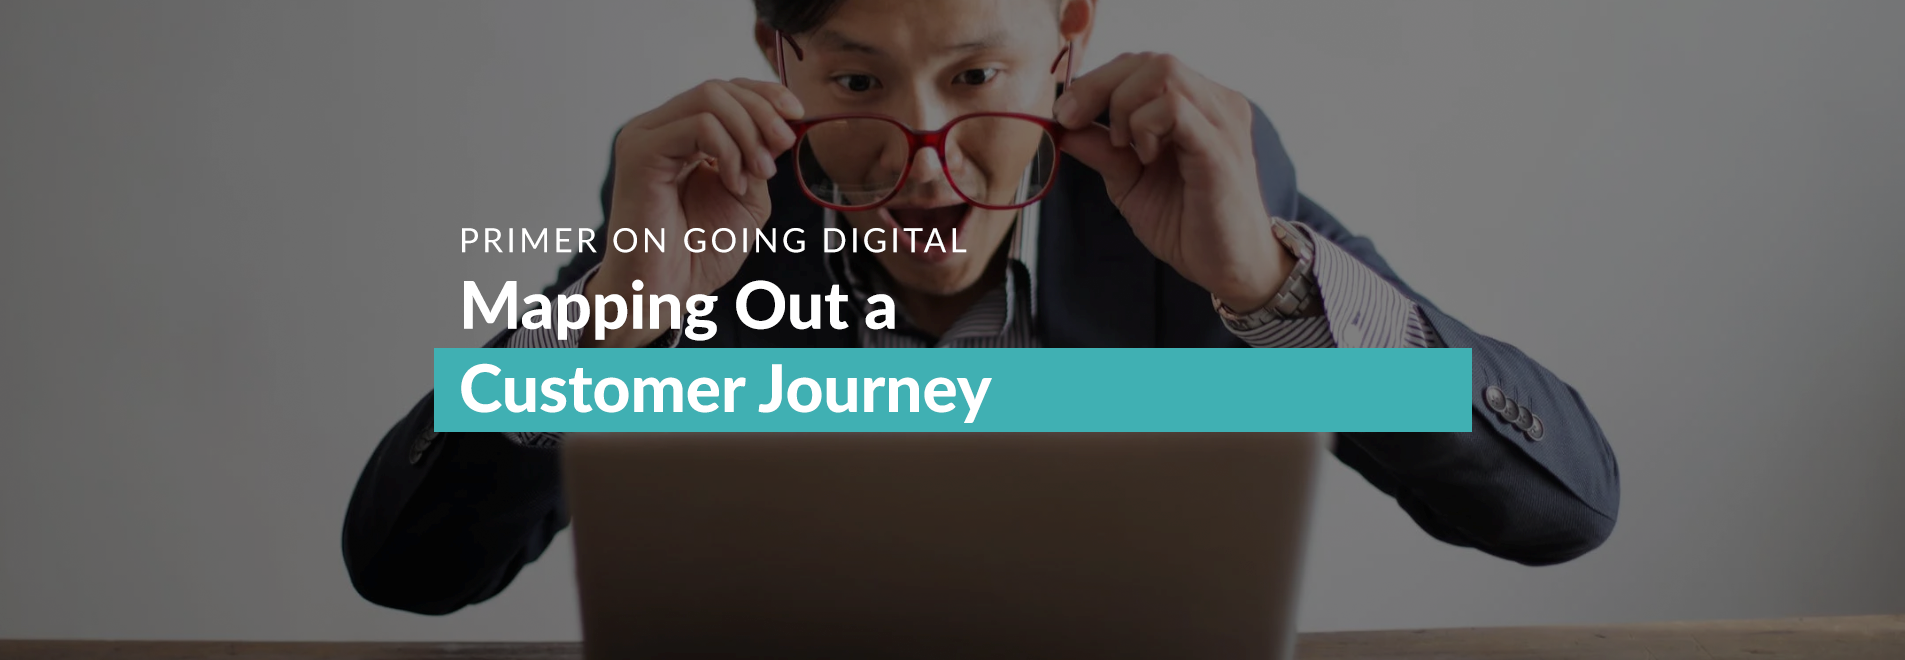 Banner: Mapping Out a Customer Journey | Primer on Going Digital